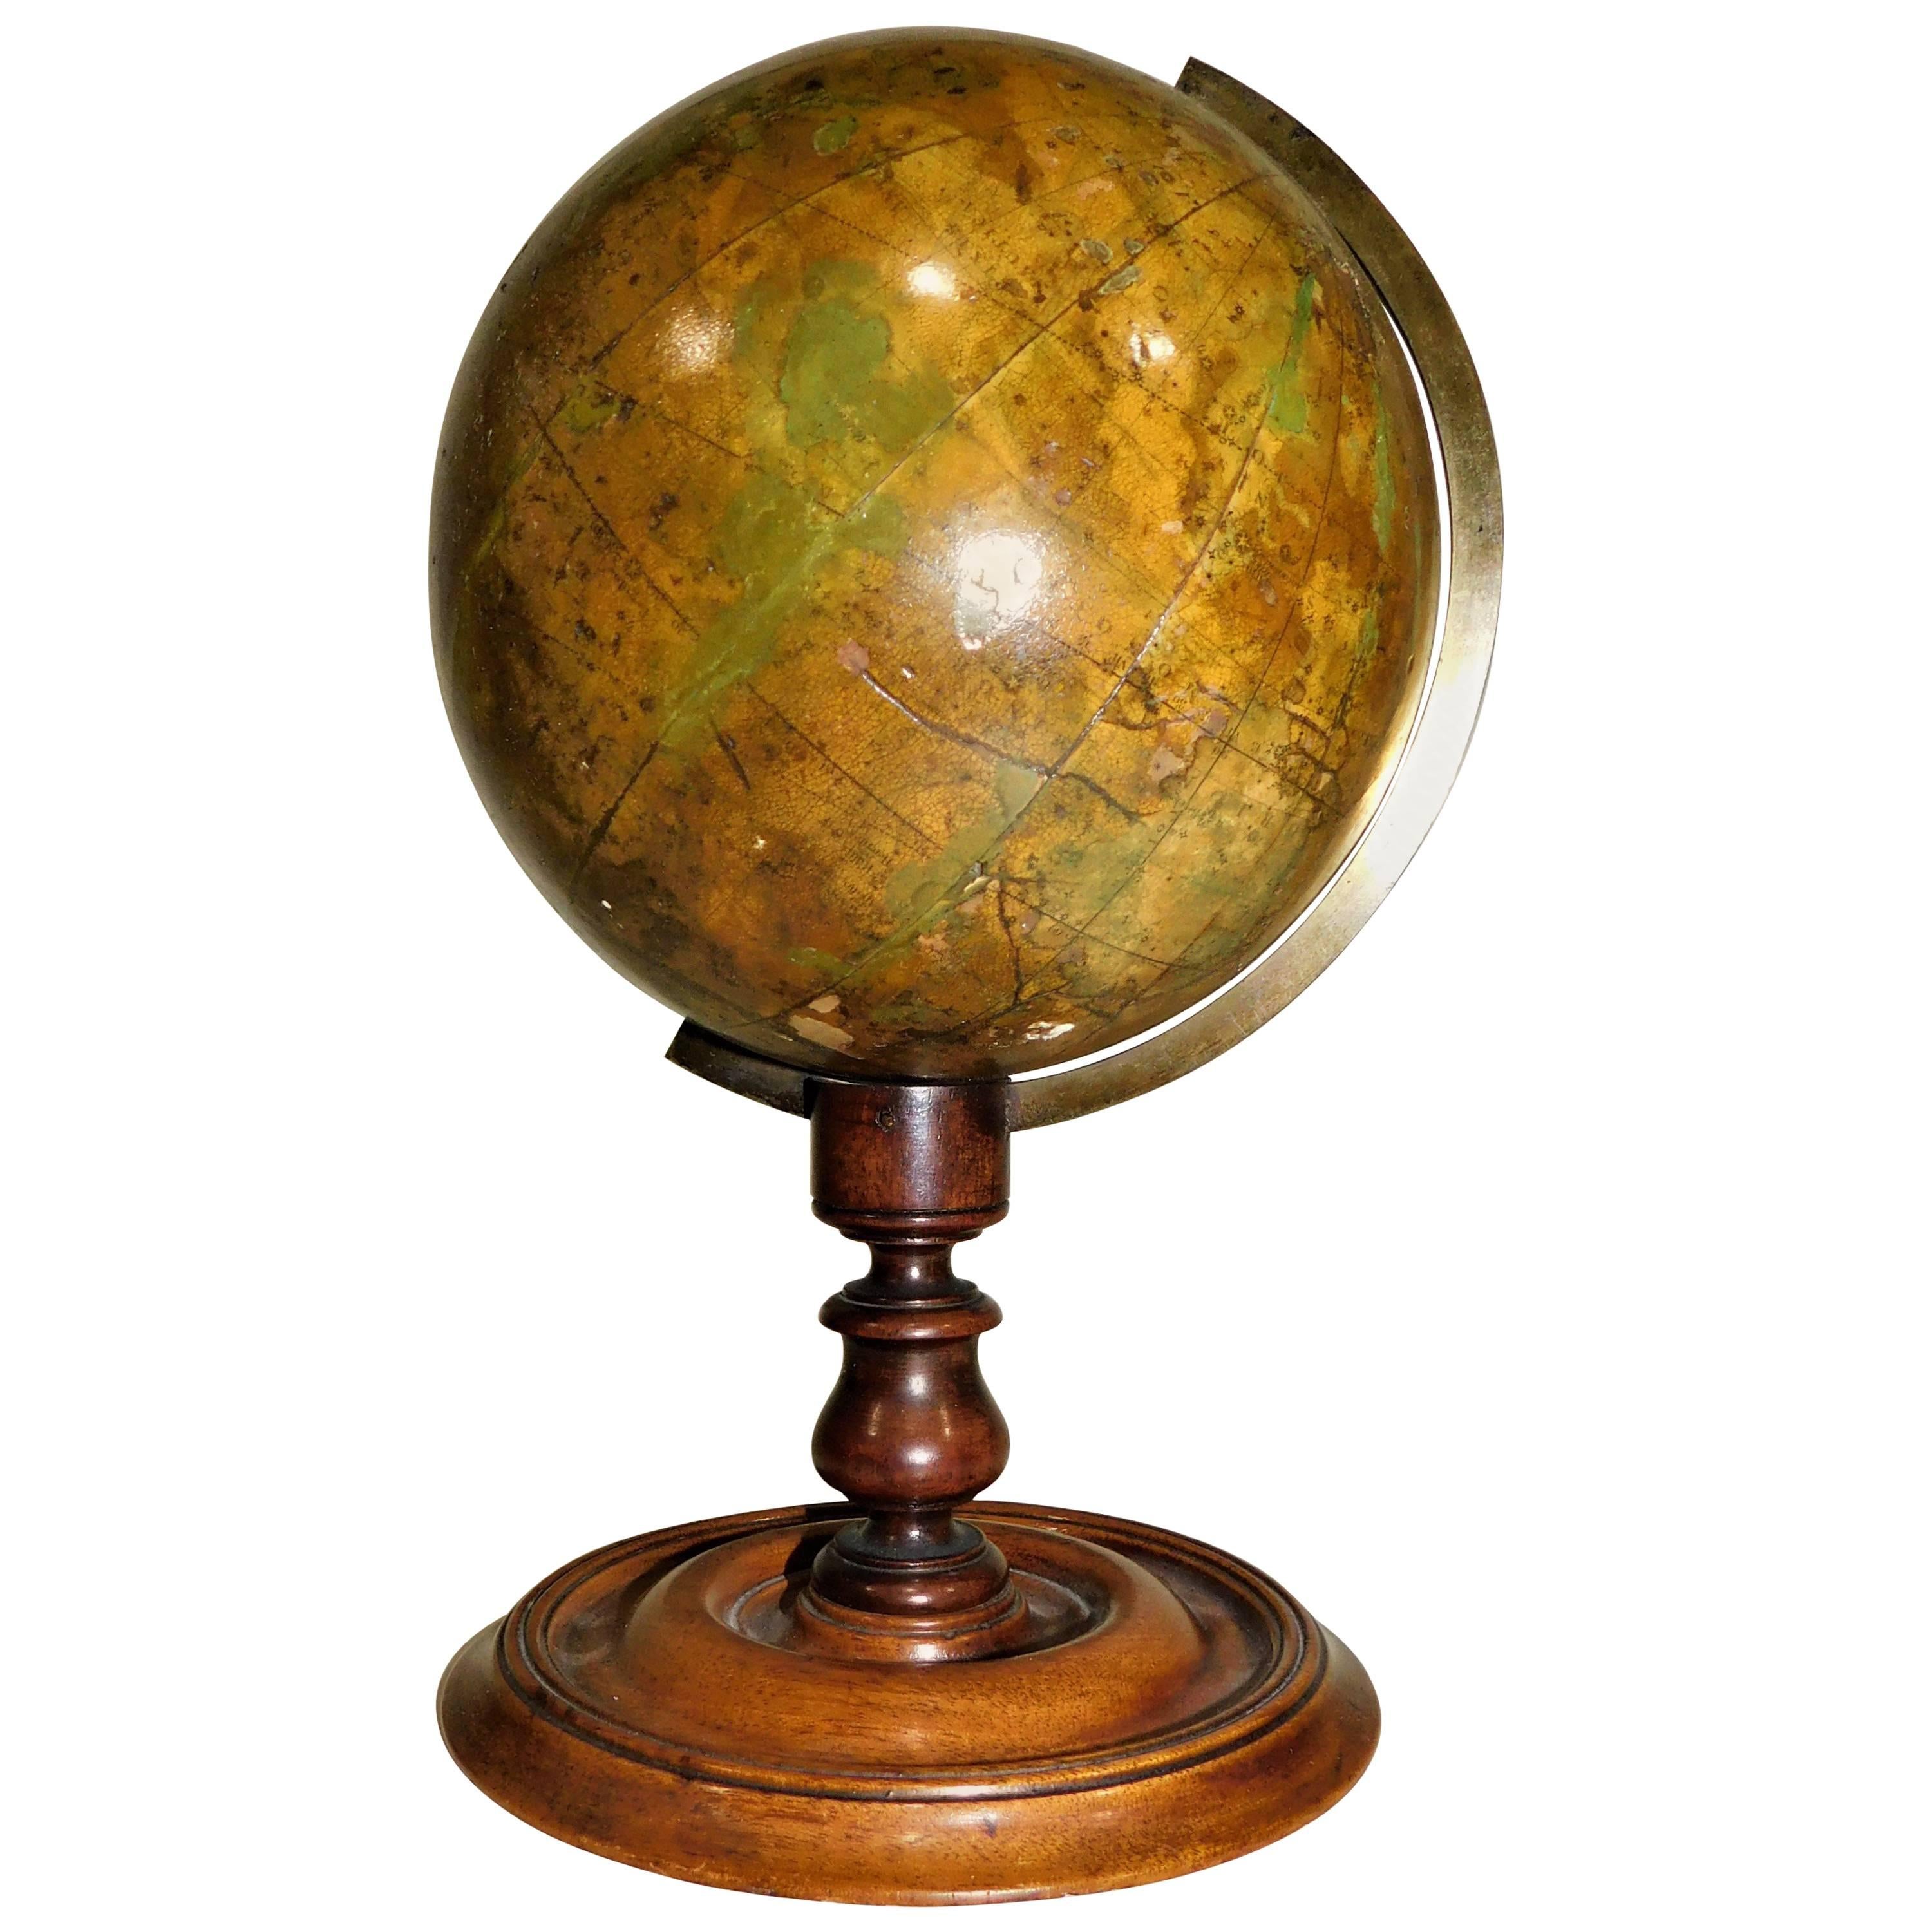 Early Victorian C. F. Crutchley's New Celestial Table Top Globe, circa 1860